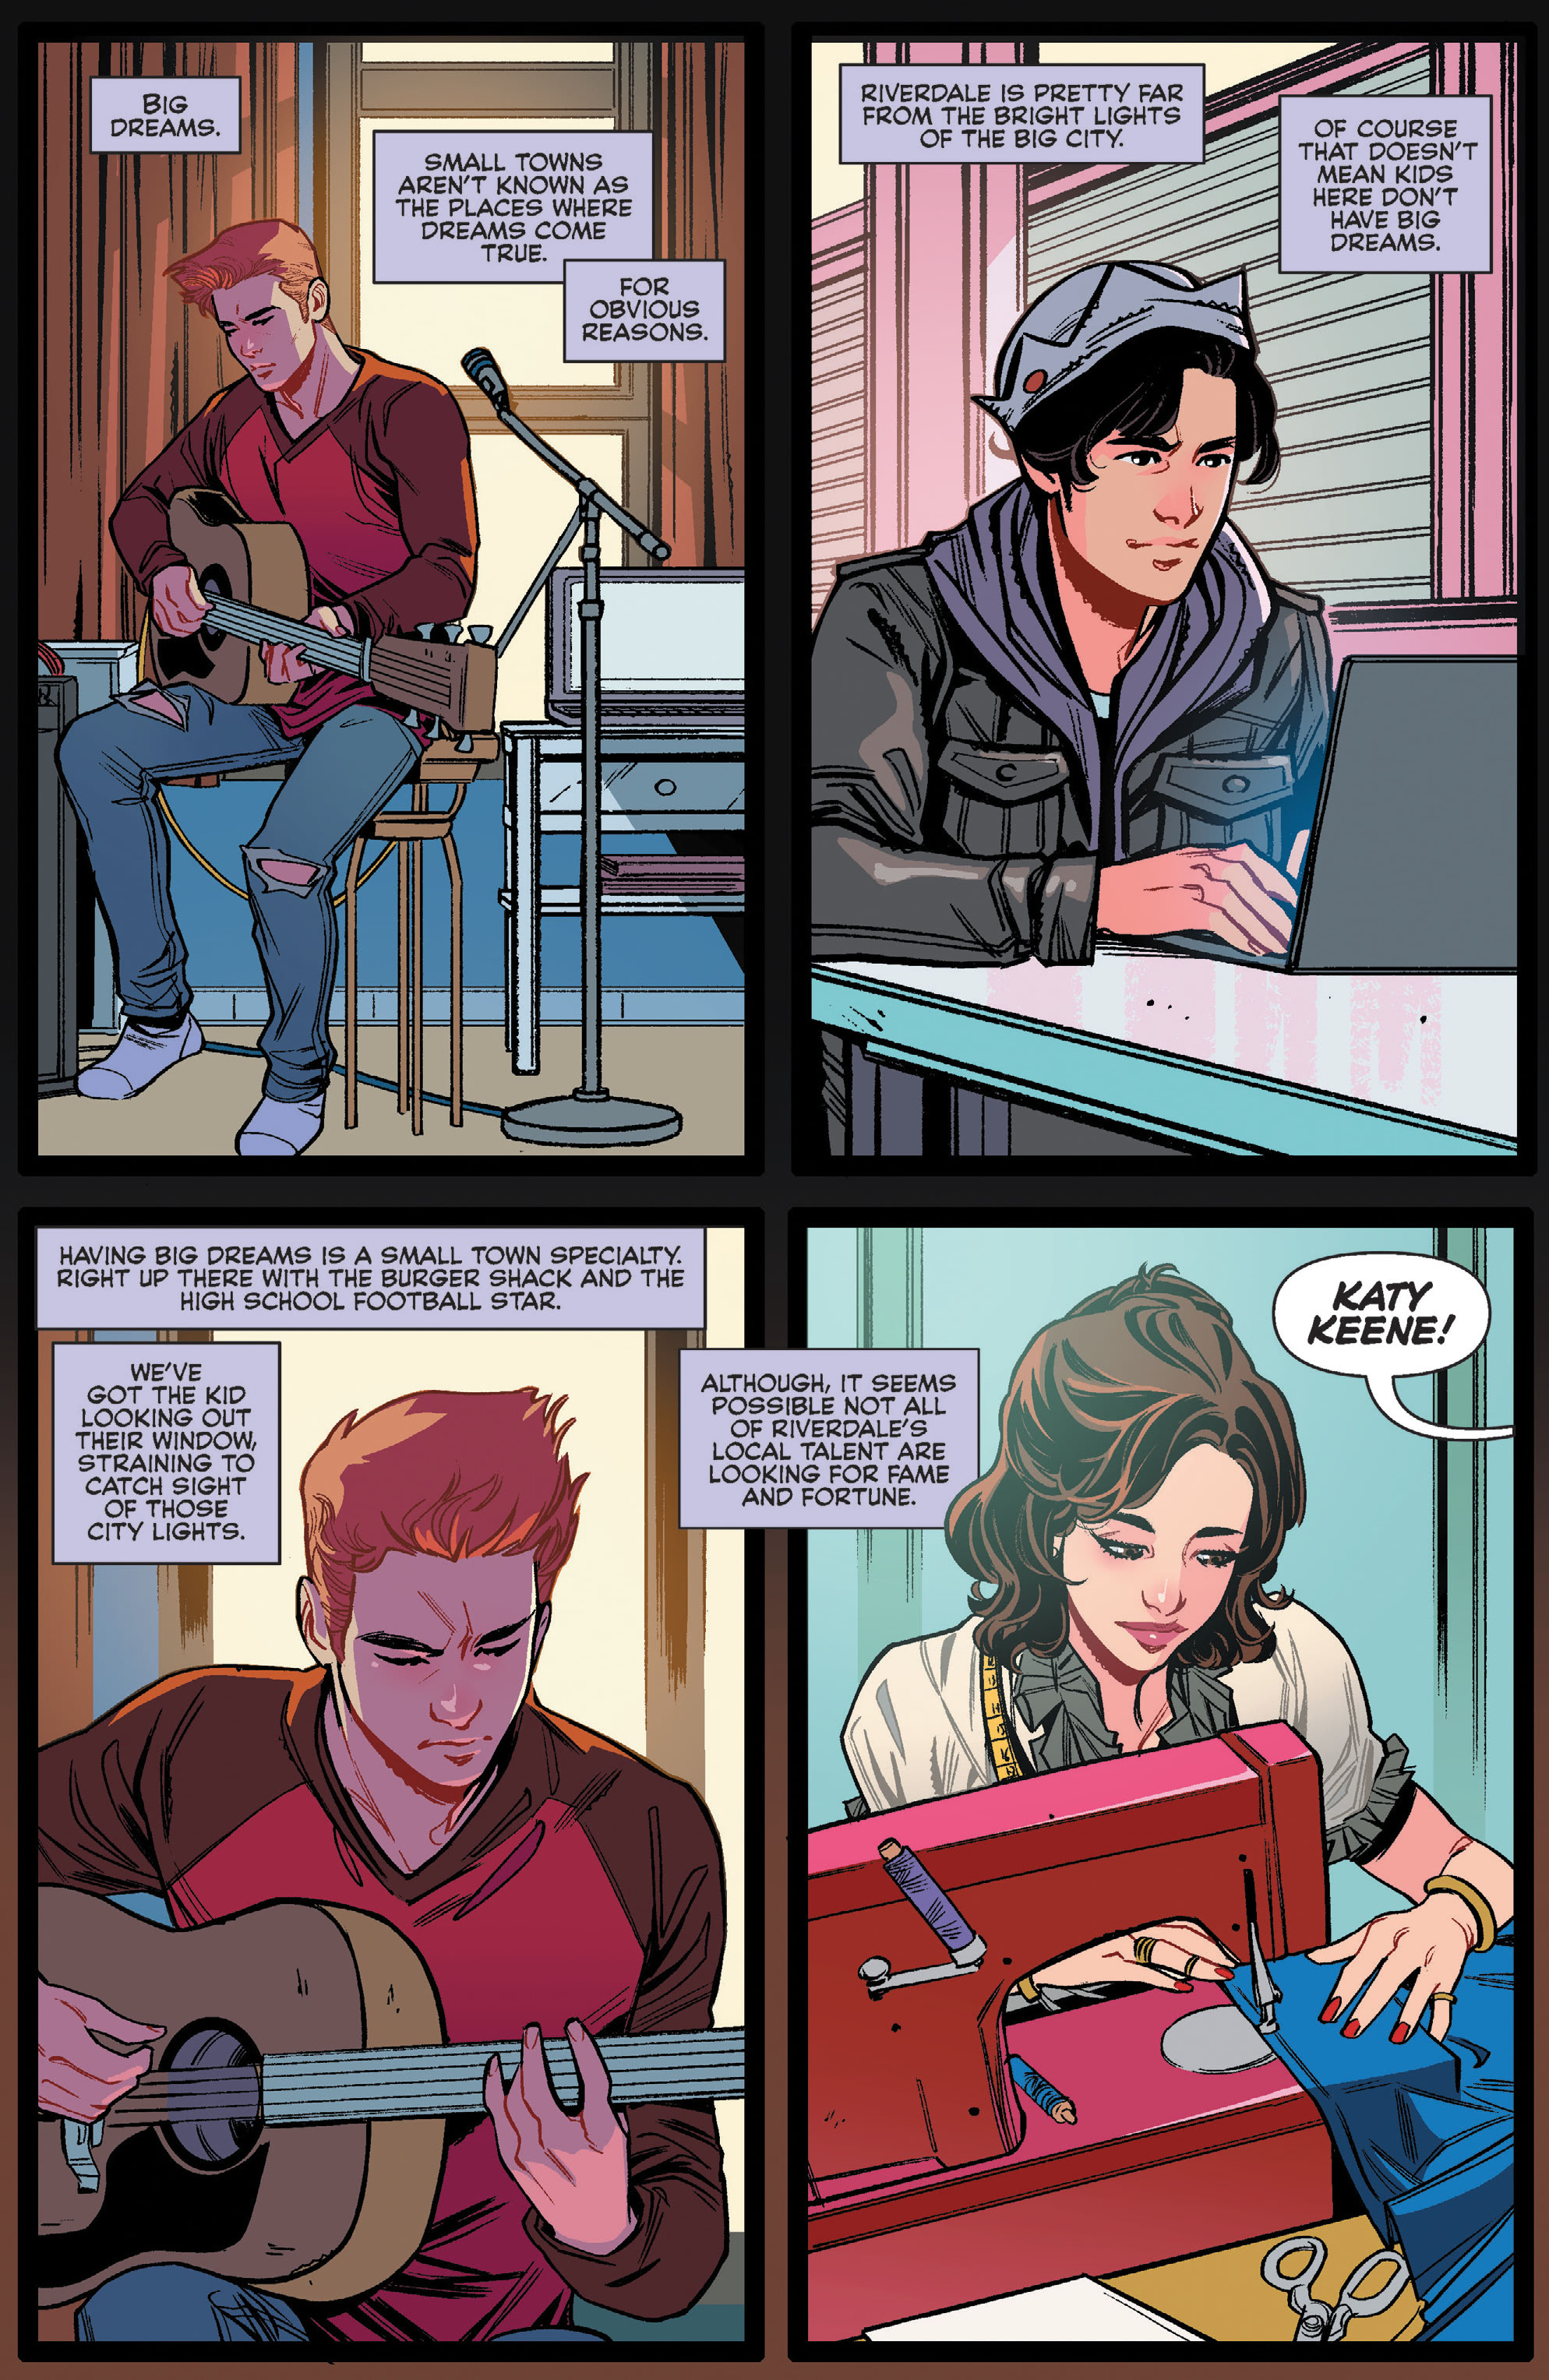 Archie (2015-): Chapter 712 - Page 3